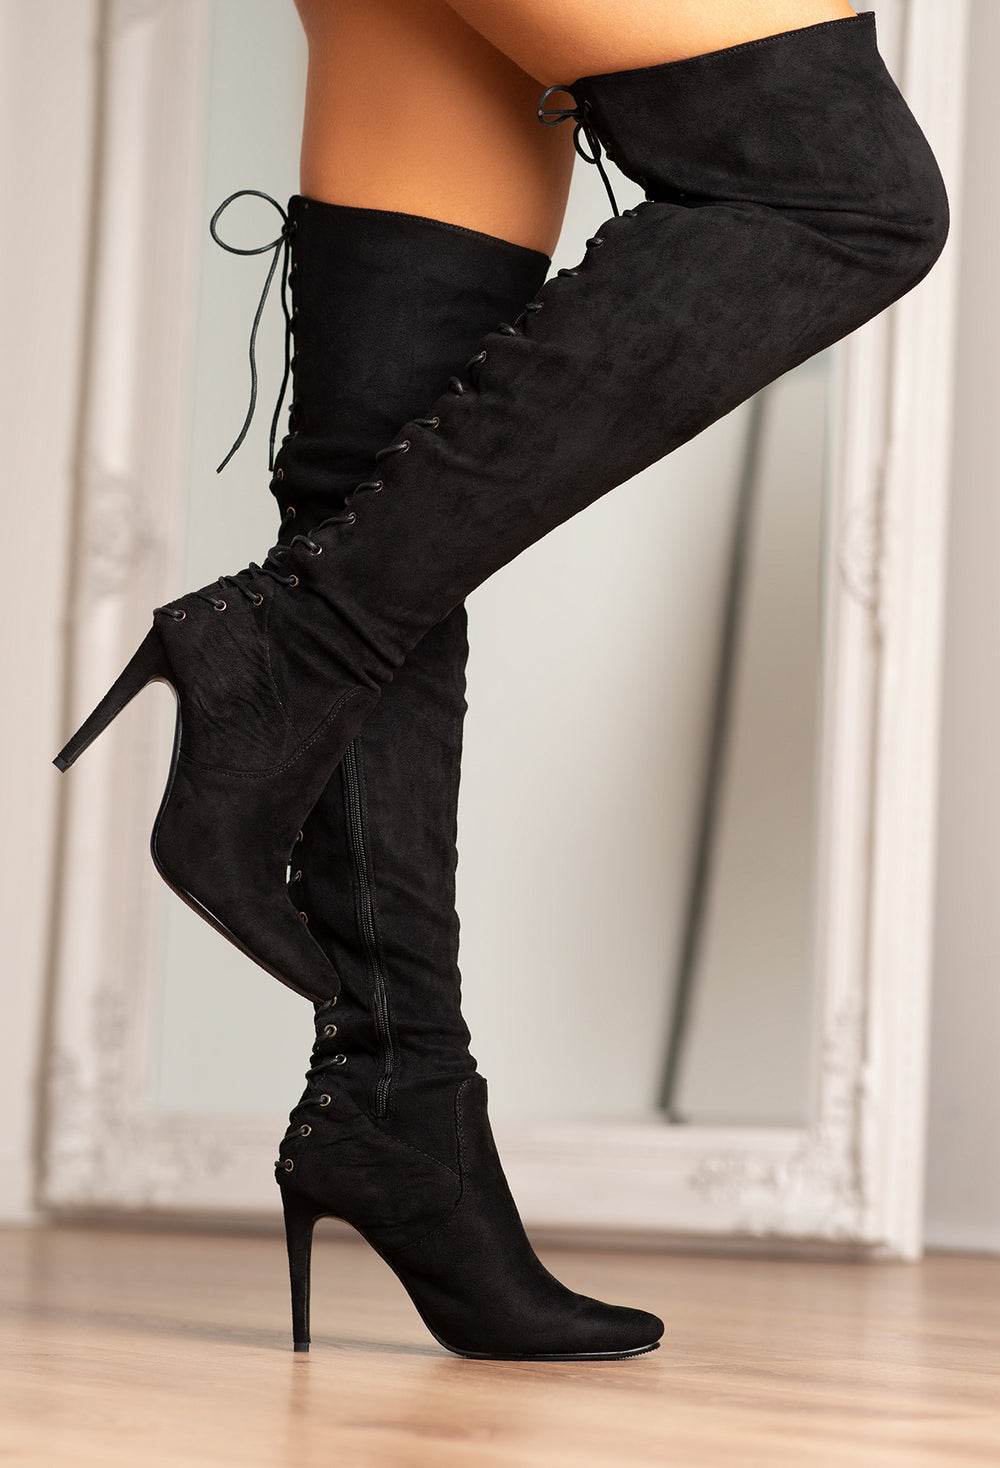 lace up knee high boots uk